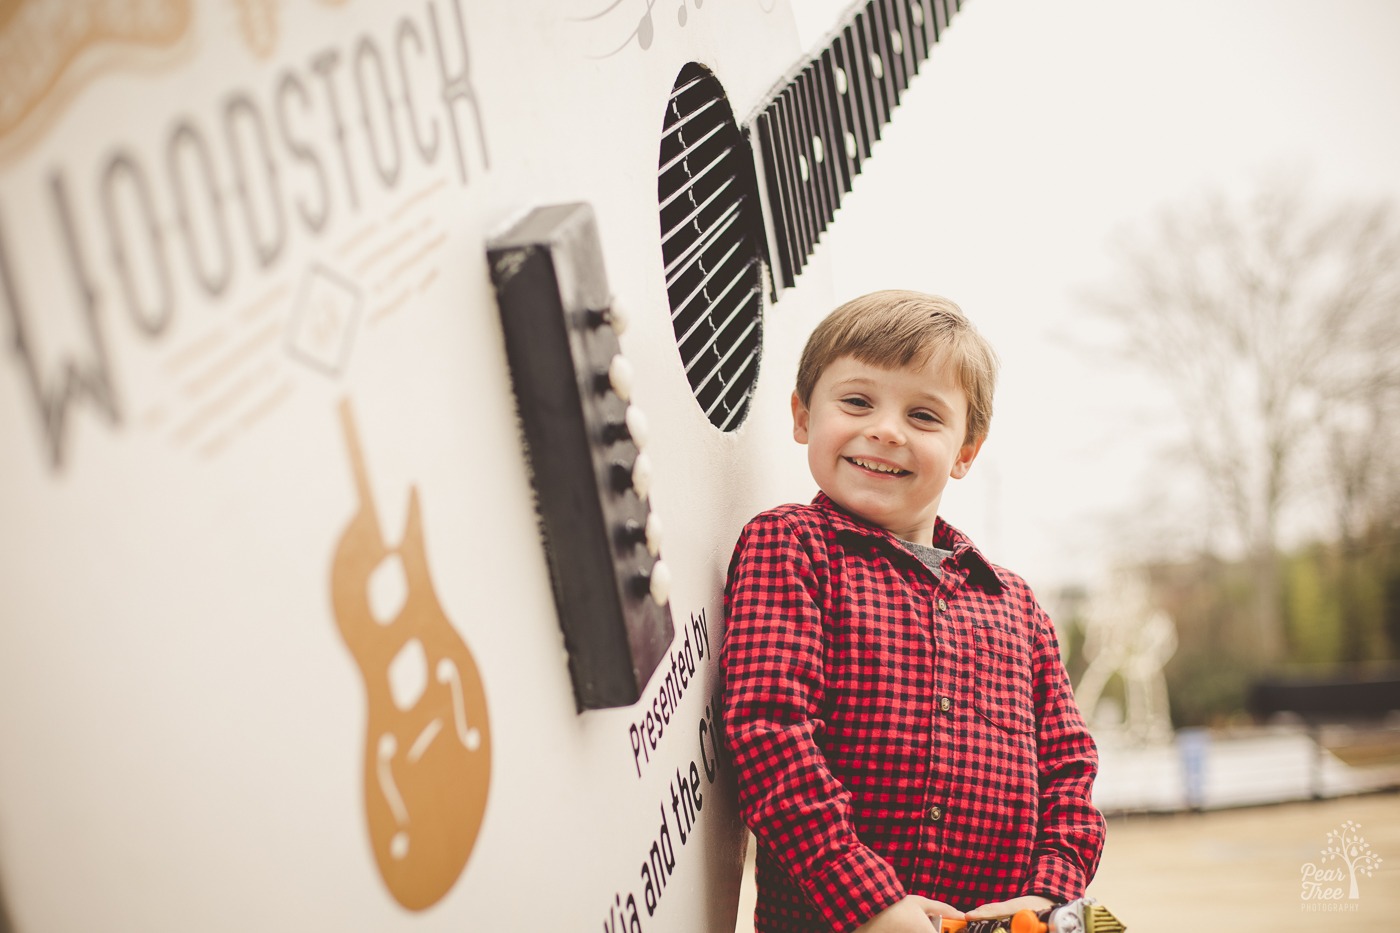 Four year old photoshoot with a boy smiling big and standing proudly against the Woodstock guitar